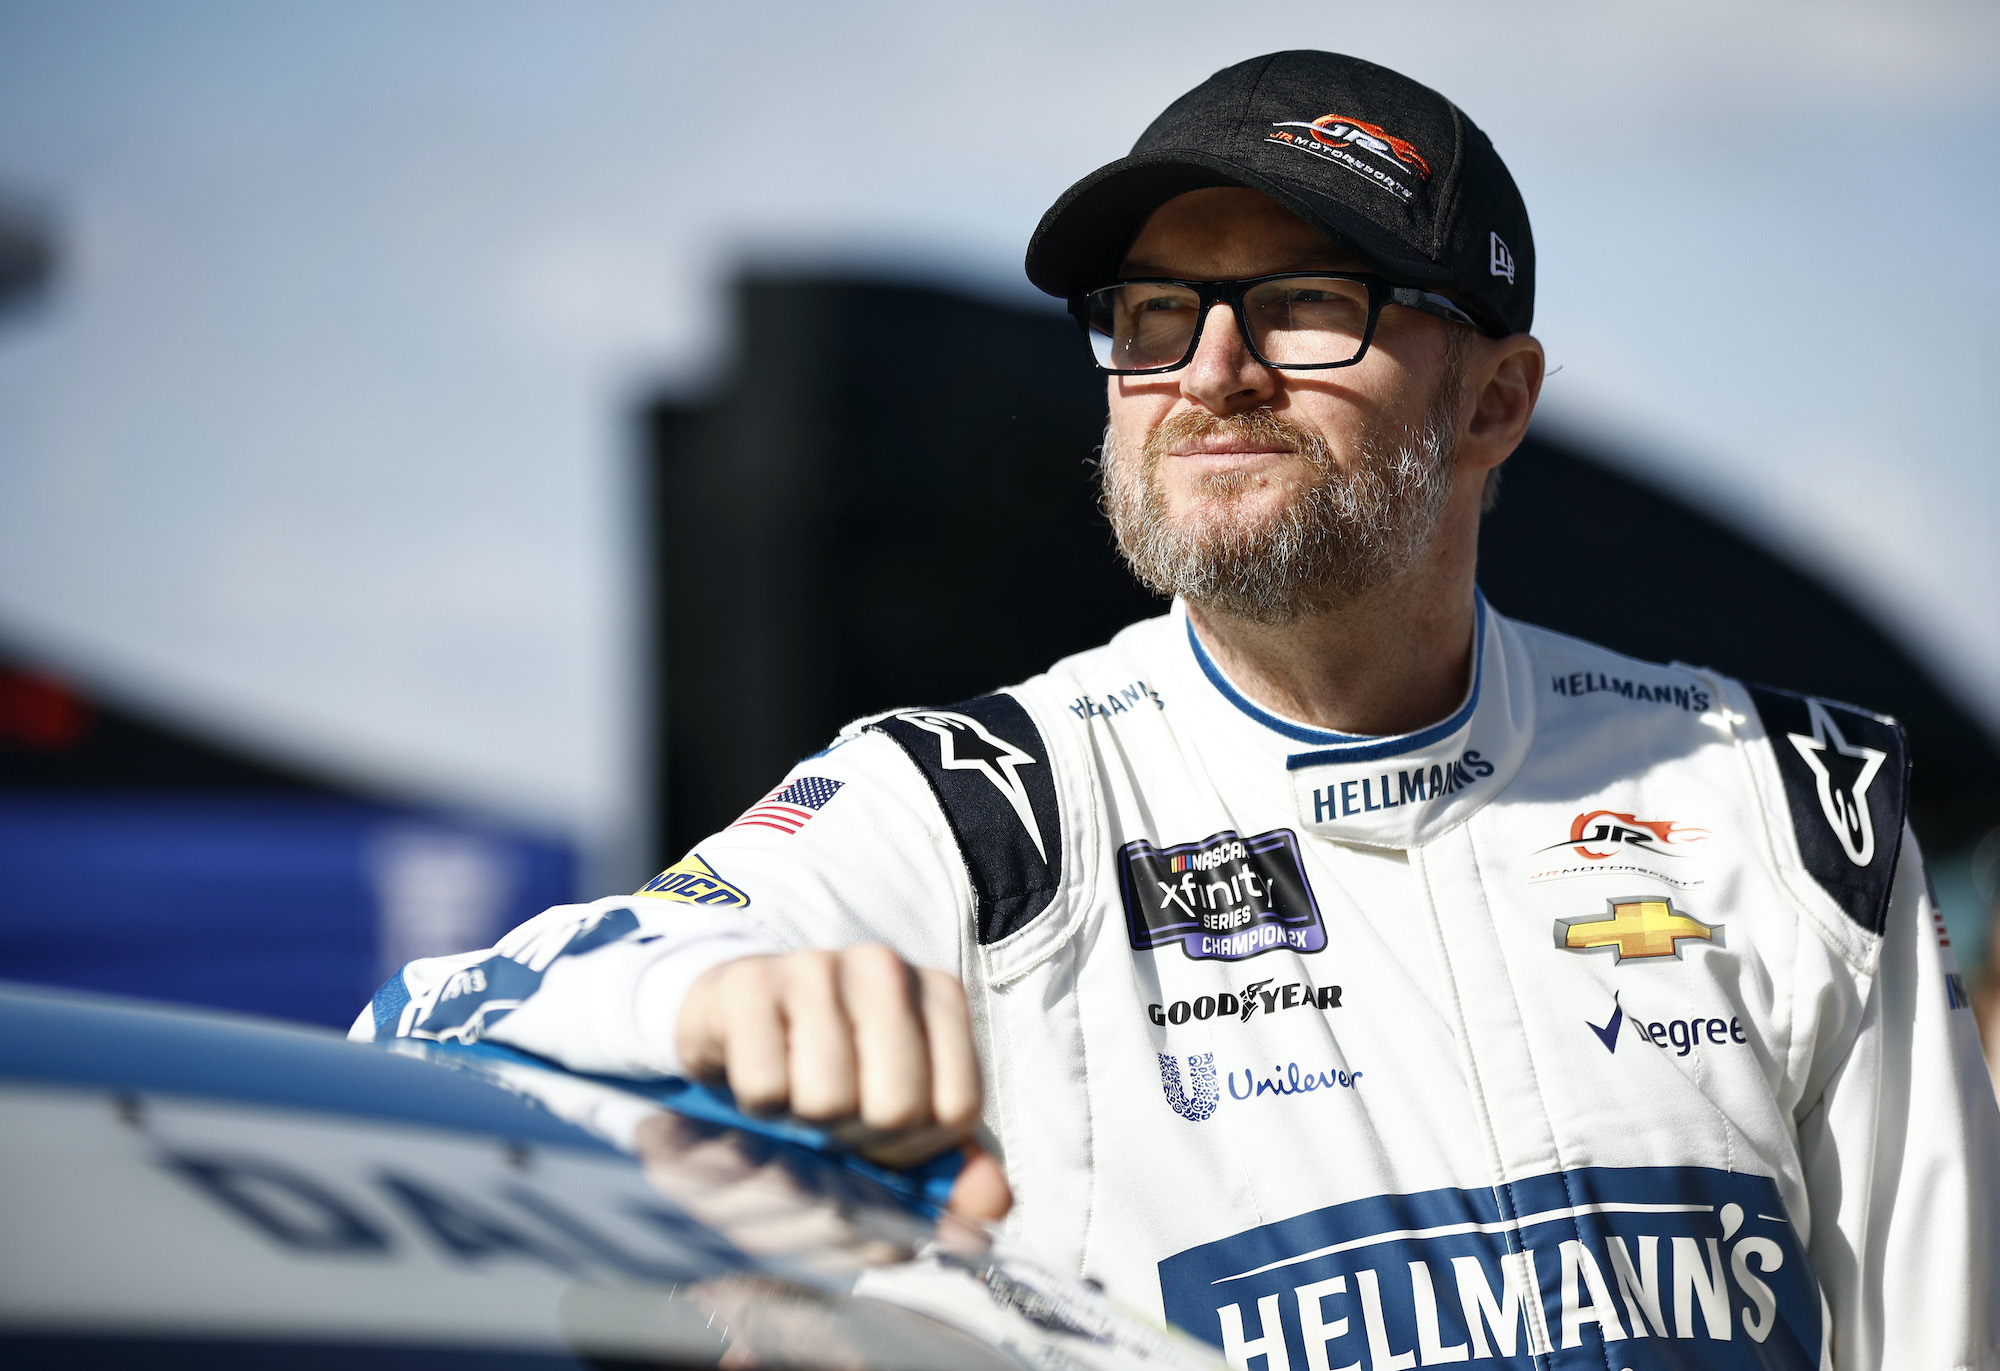 Dale Earnhardt Jr. Forgives NASCAR During Martinsville Race for How Organization Treated Him in Another Race Years Earlier: ‘We’re Even NASCAR’